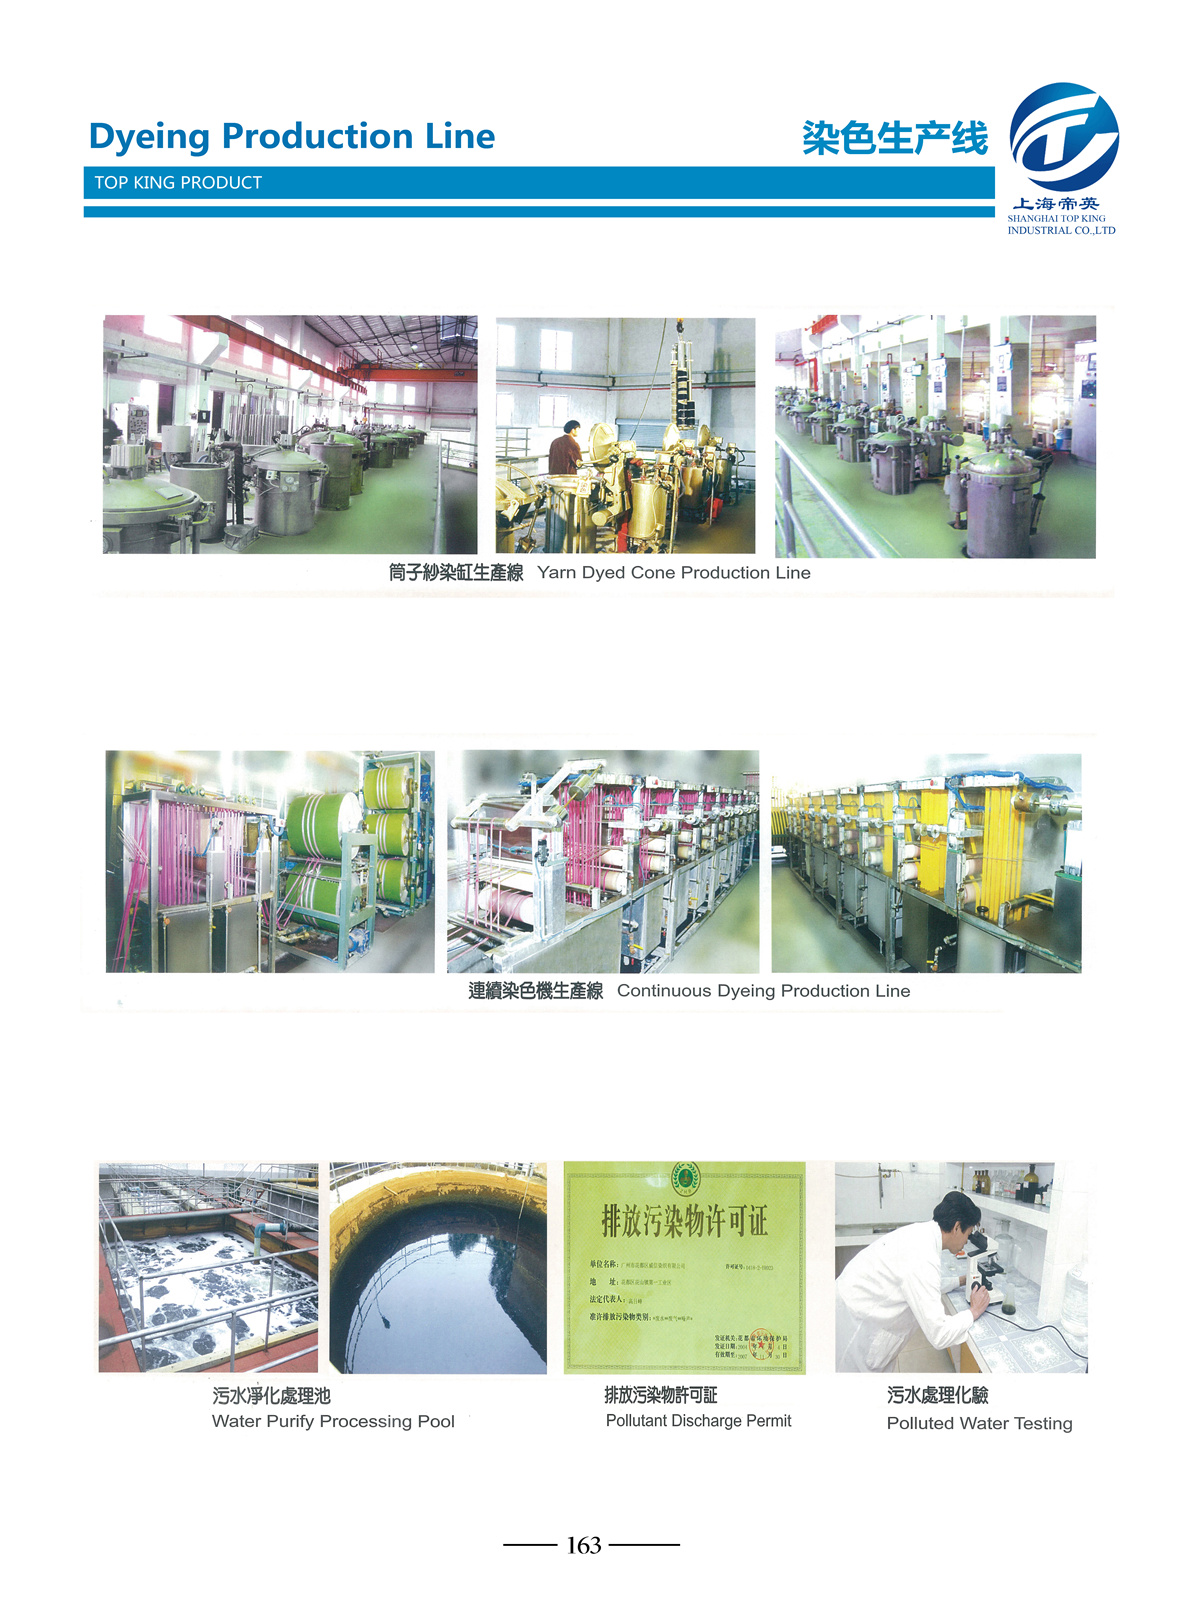 Dyeing Production Line